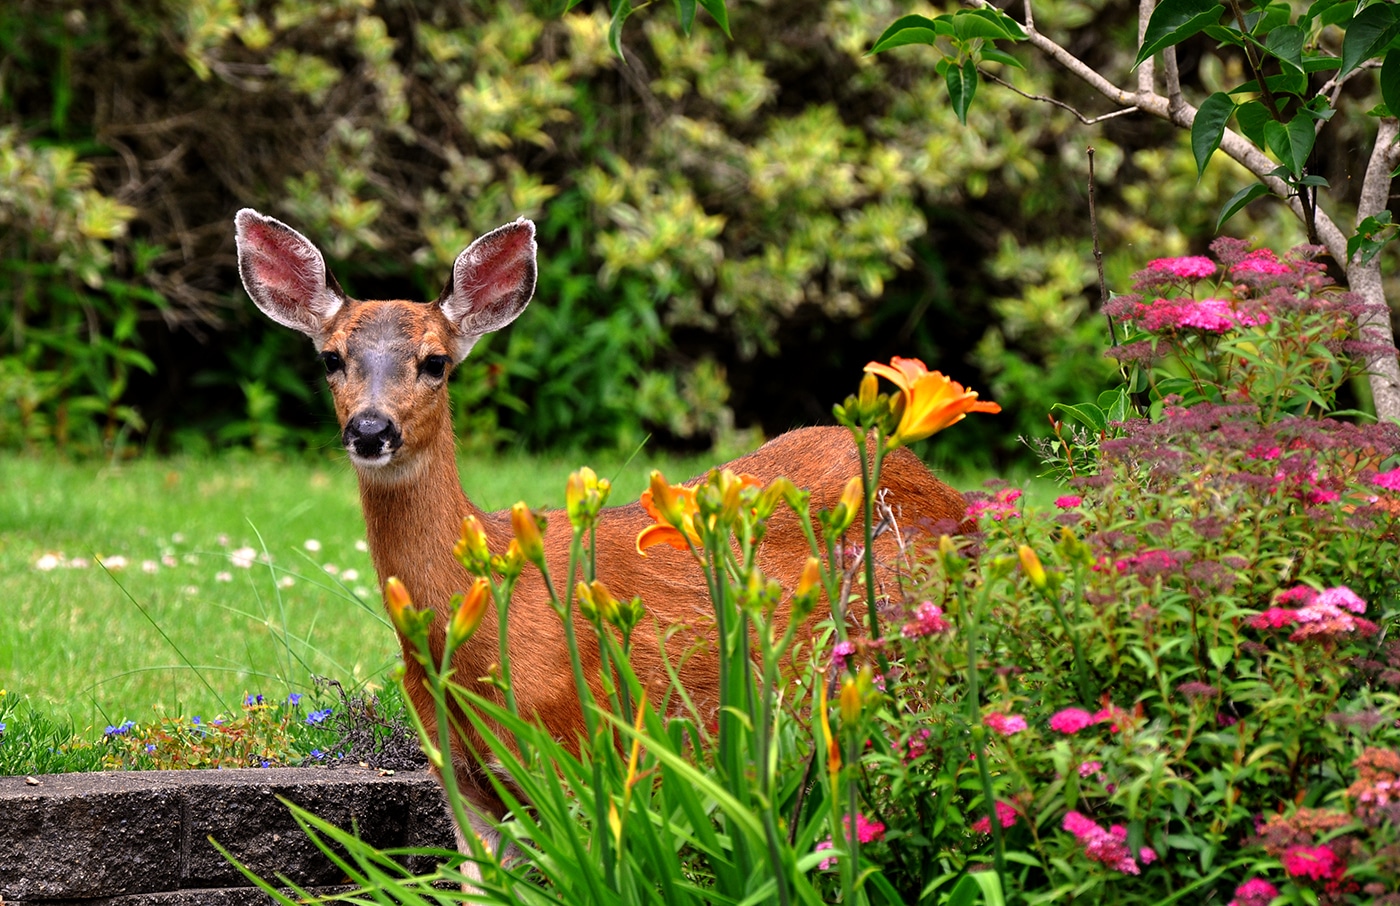 How do I keep deer and rabbits from eating my plants